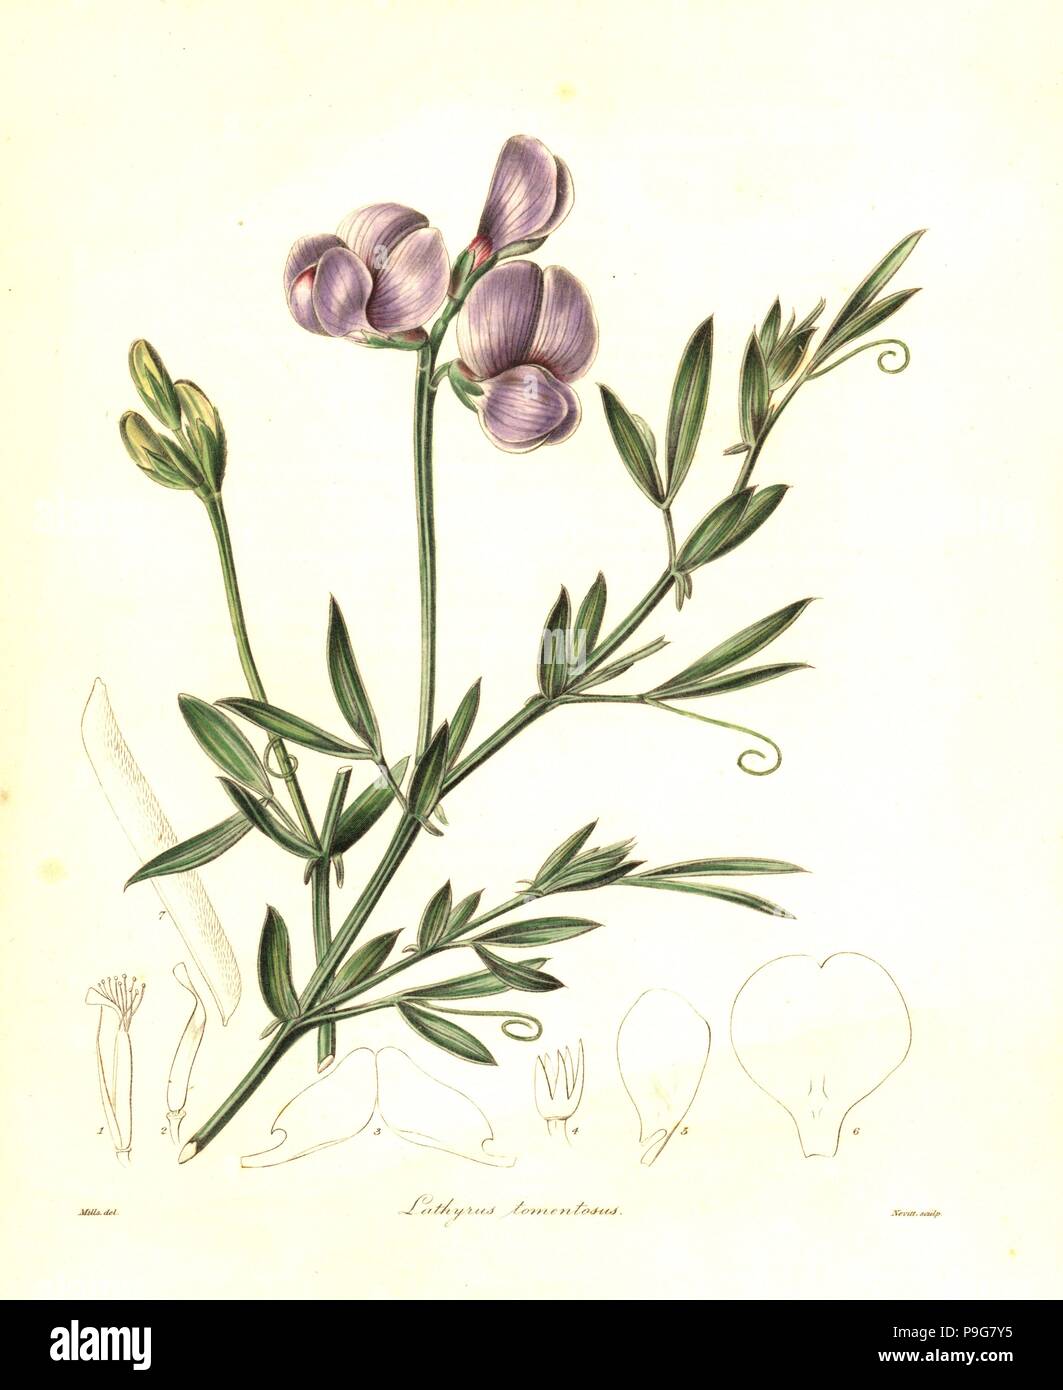 Cottony lathyrus, Lathyrus tomentosus. Handcoloured copperplate engraving by S. Nevitt after a botanical illustration by Mills from Benjamin Maund and the Rev. John Stevens Henslow's The Botanist, London, 1836. Stock Photo